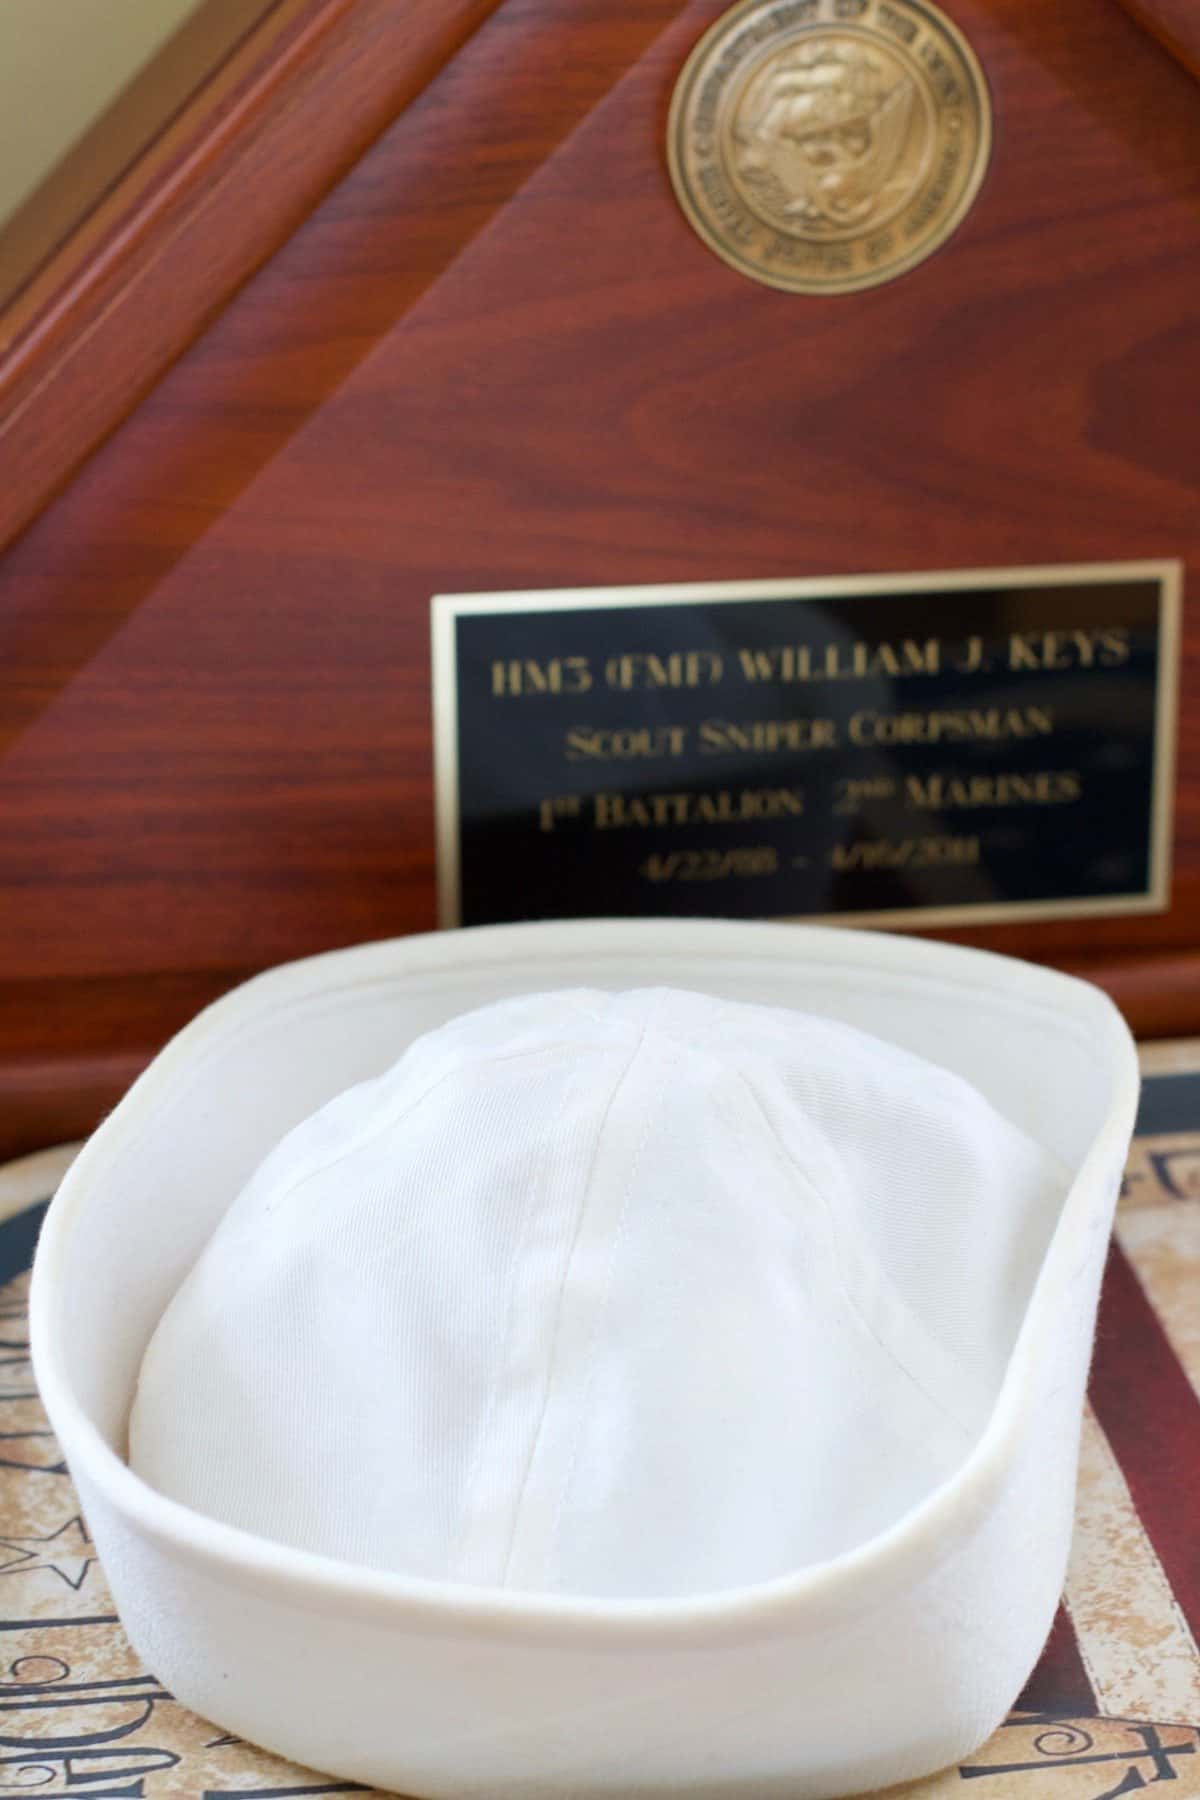 white sailor cap is one of my favorites of the many hats he wore